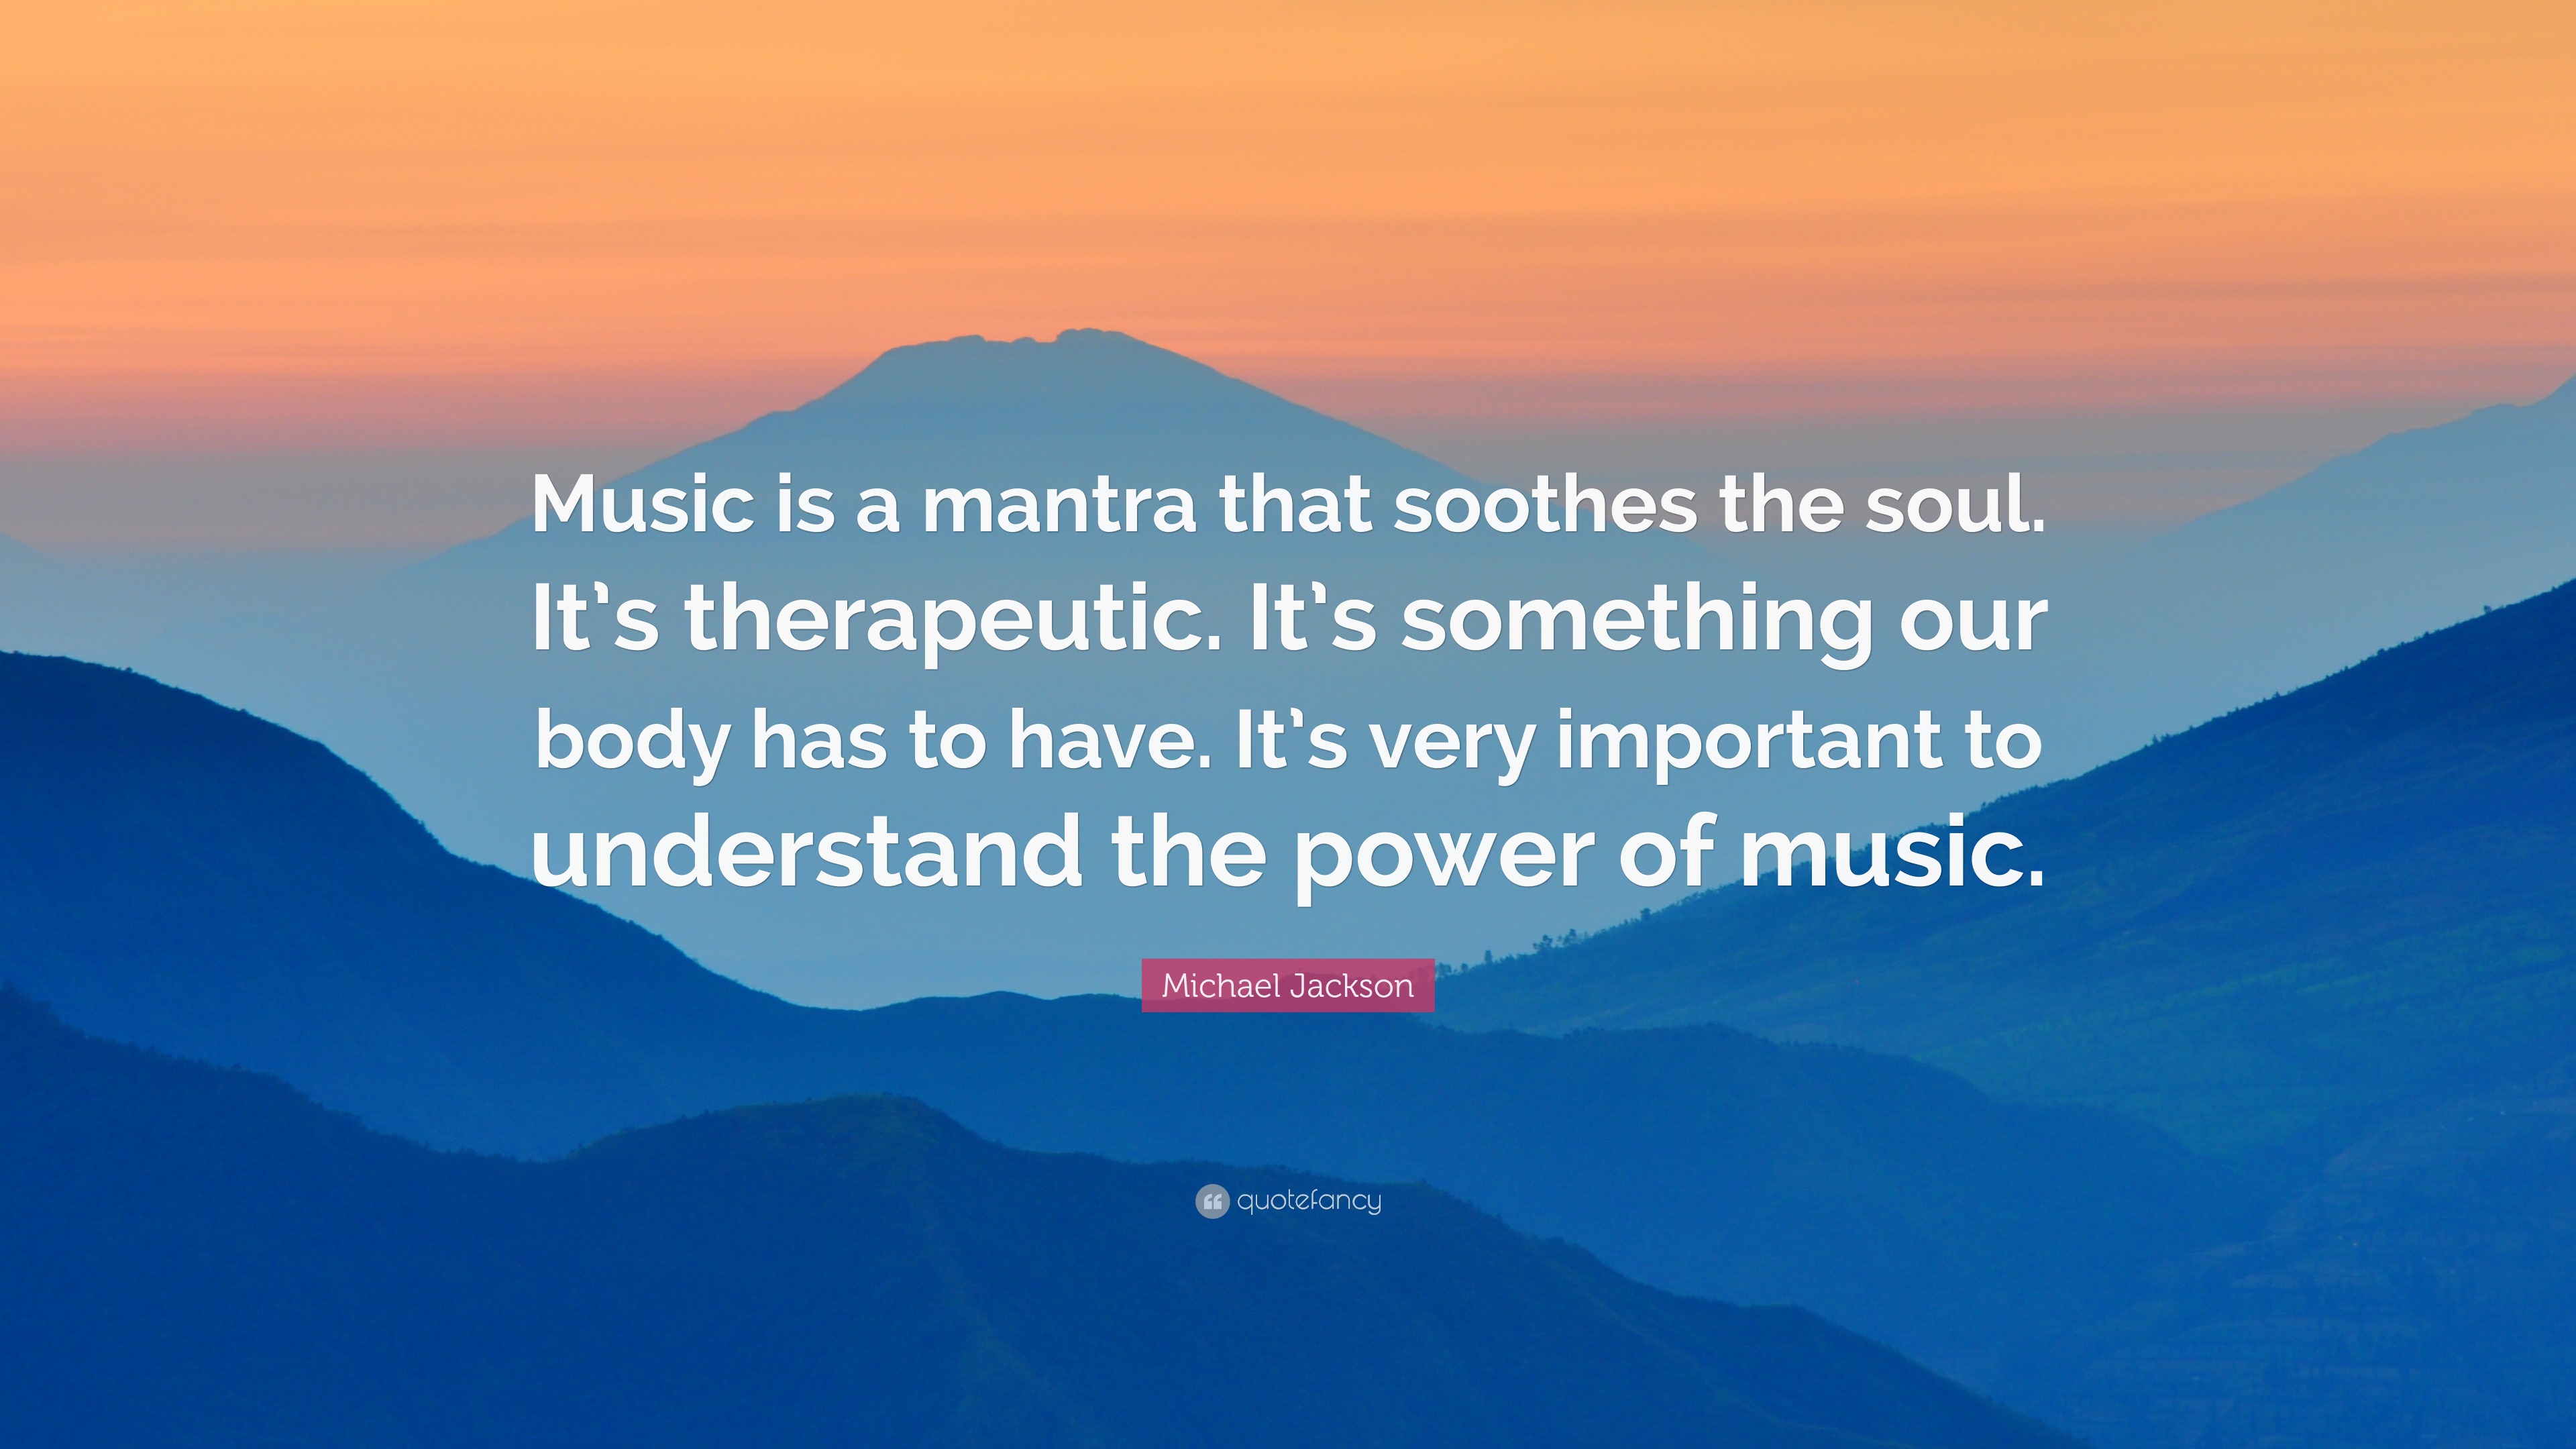 Michael Jackson Quote: “Music is a mantra that soothes the soul. It’s ...